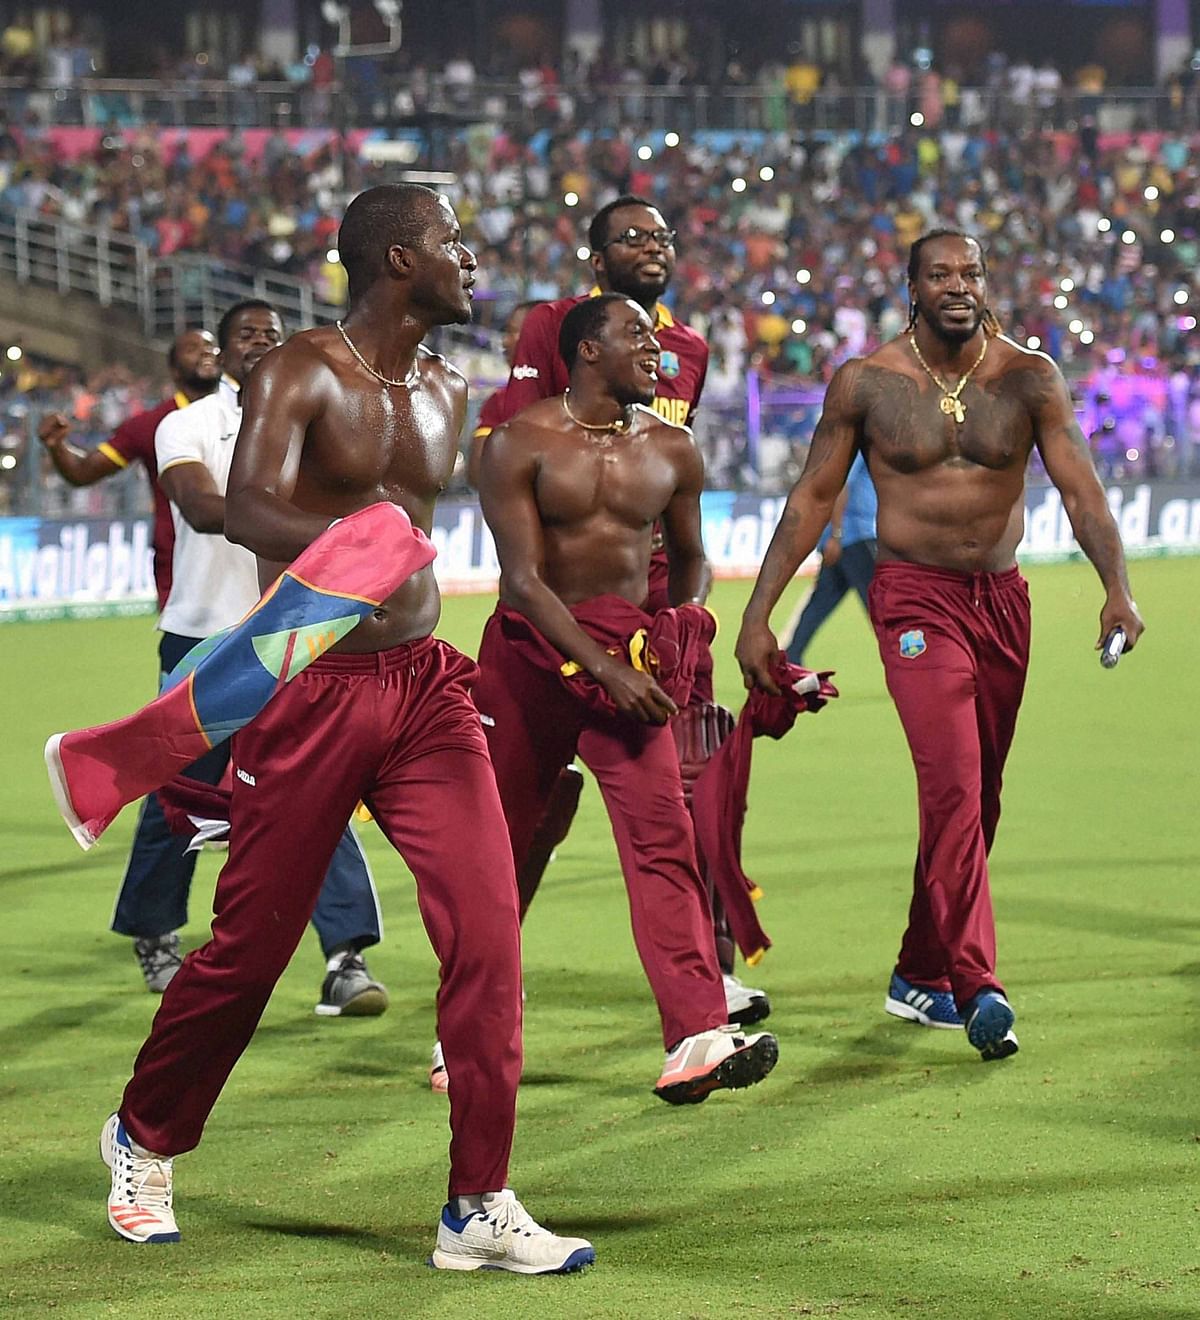 ‘We did not even have our jerseys before the tournament,’ said WI skipper Sammy.